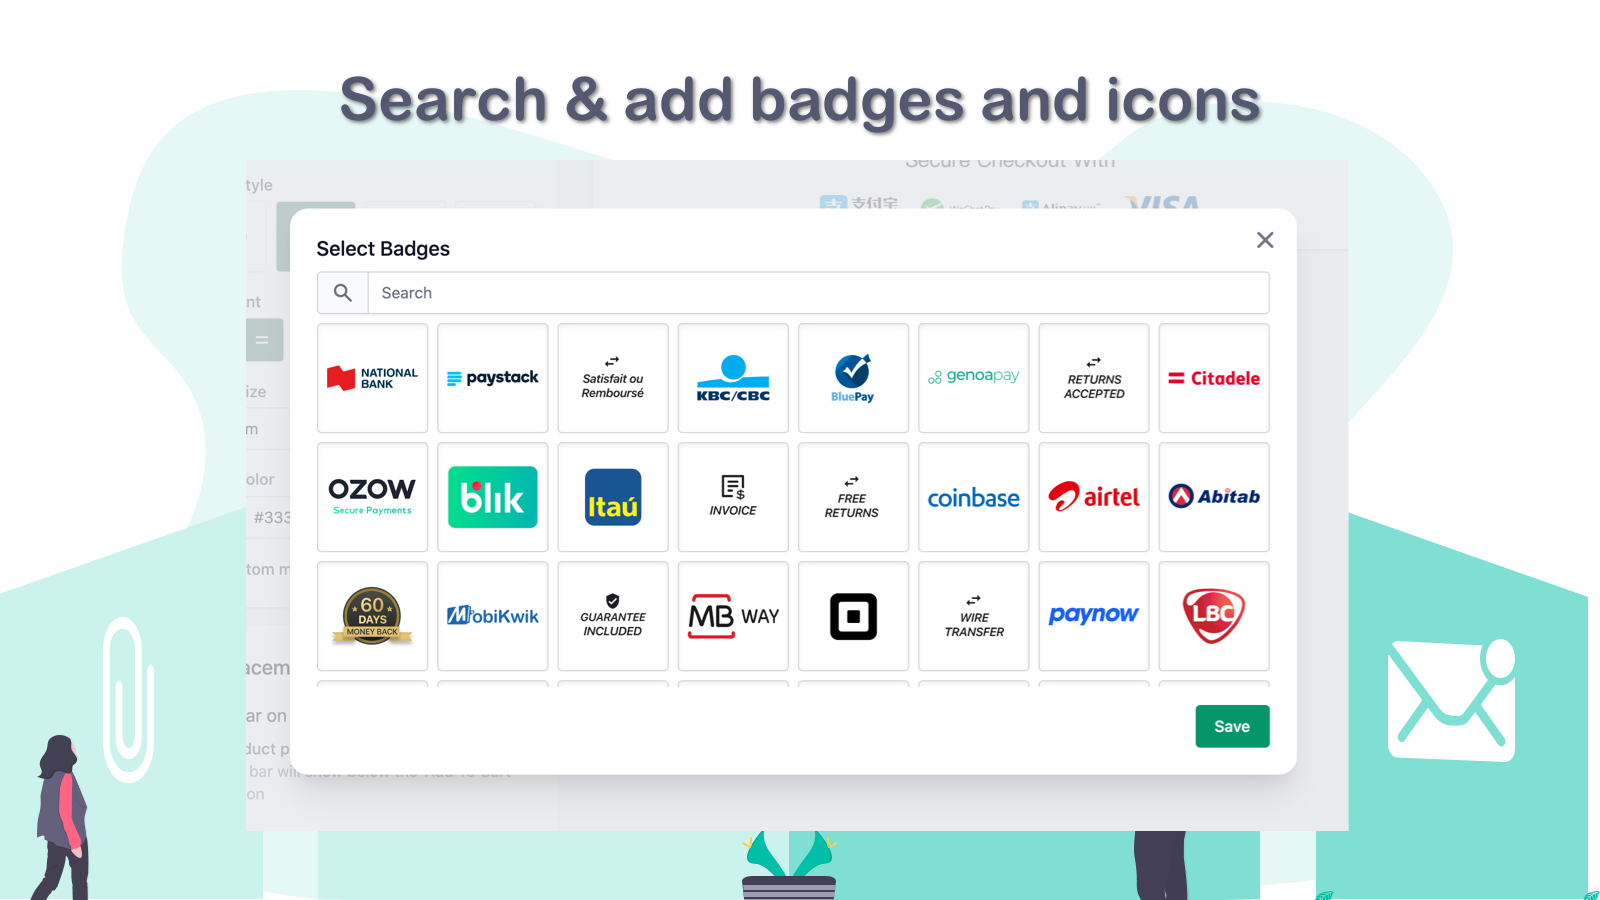 Search & add badges and icons